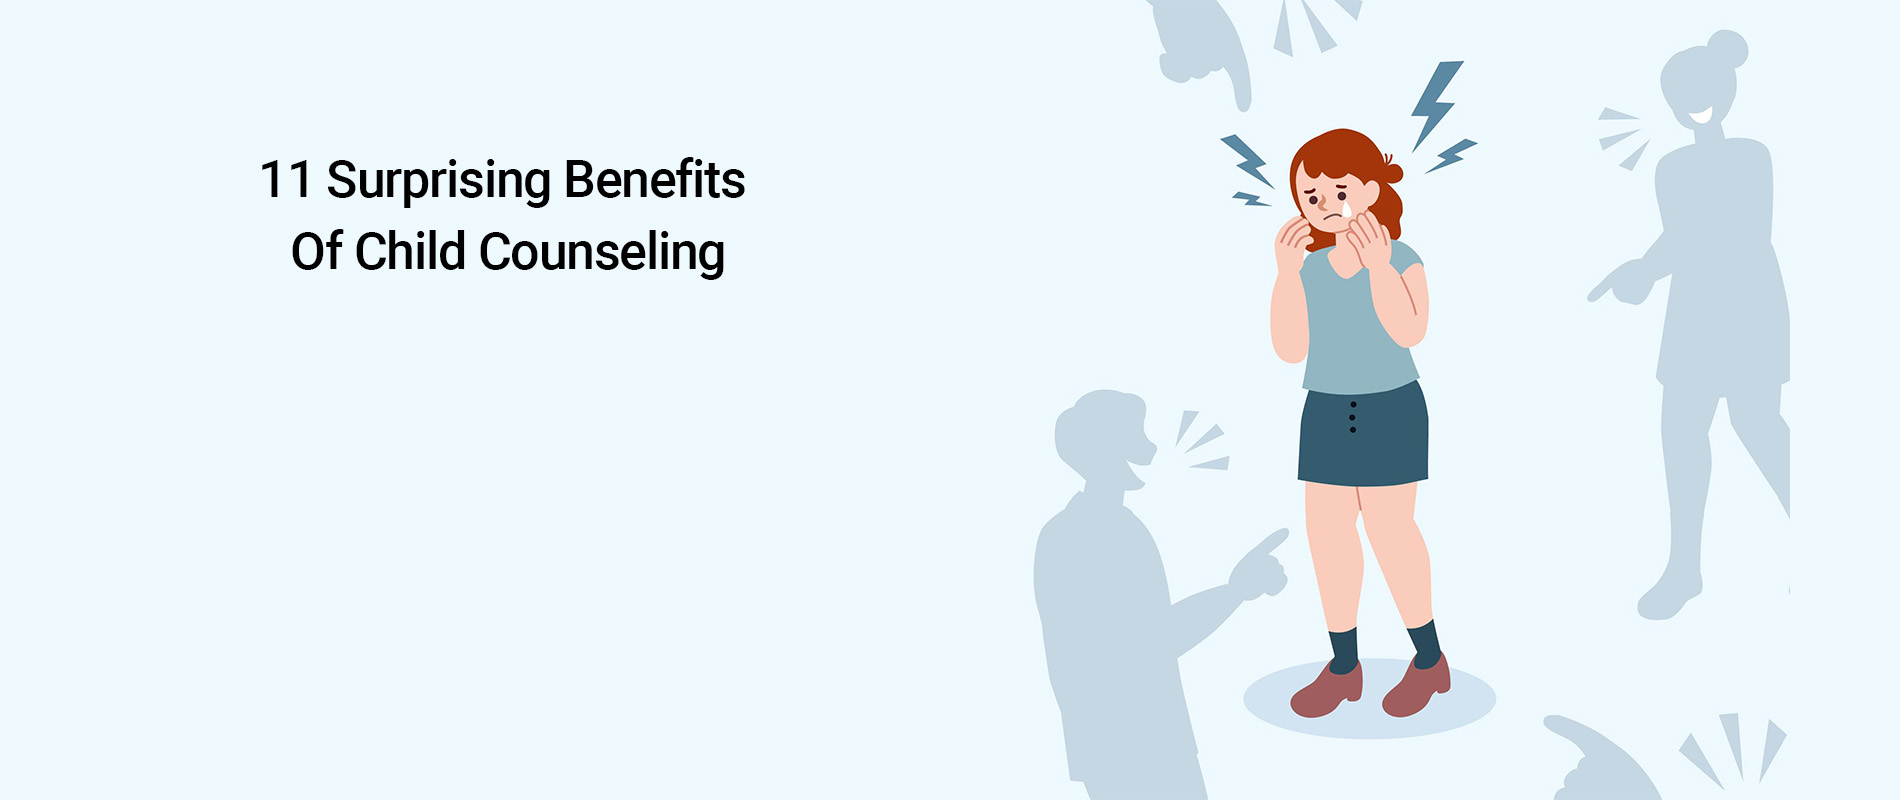 Benefits of Child Counseling